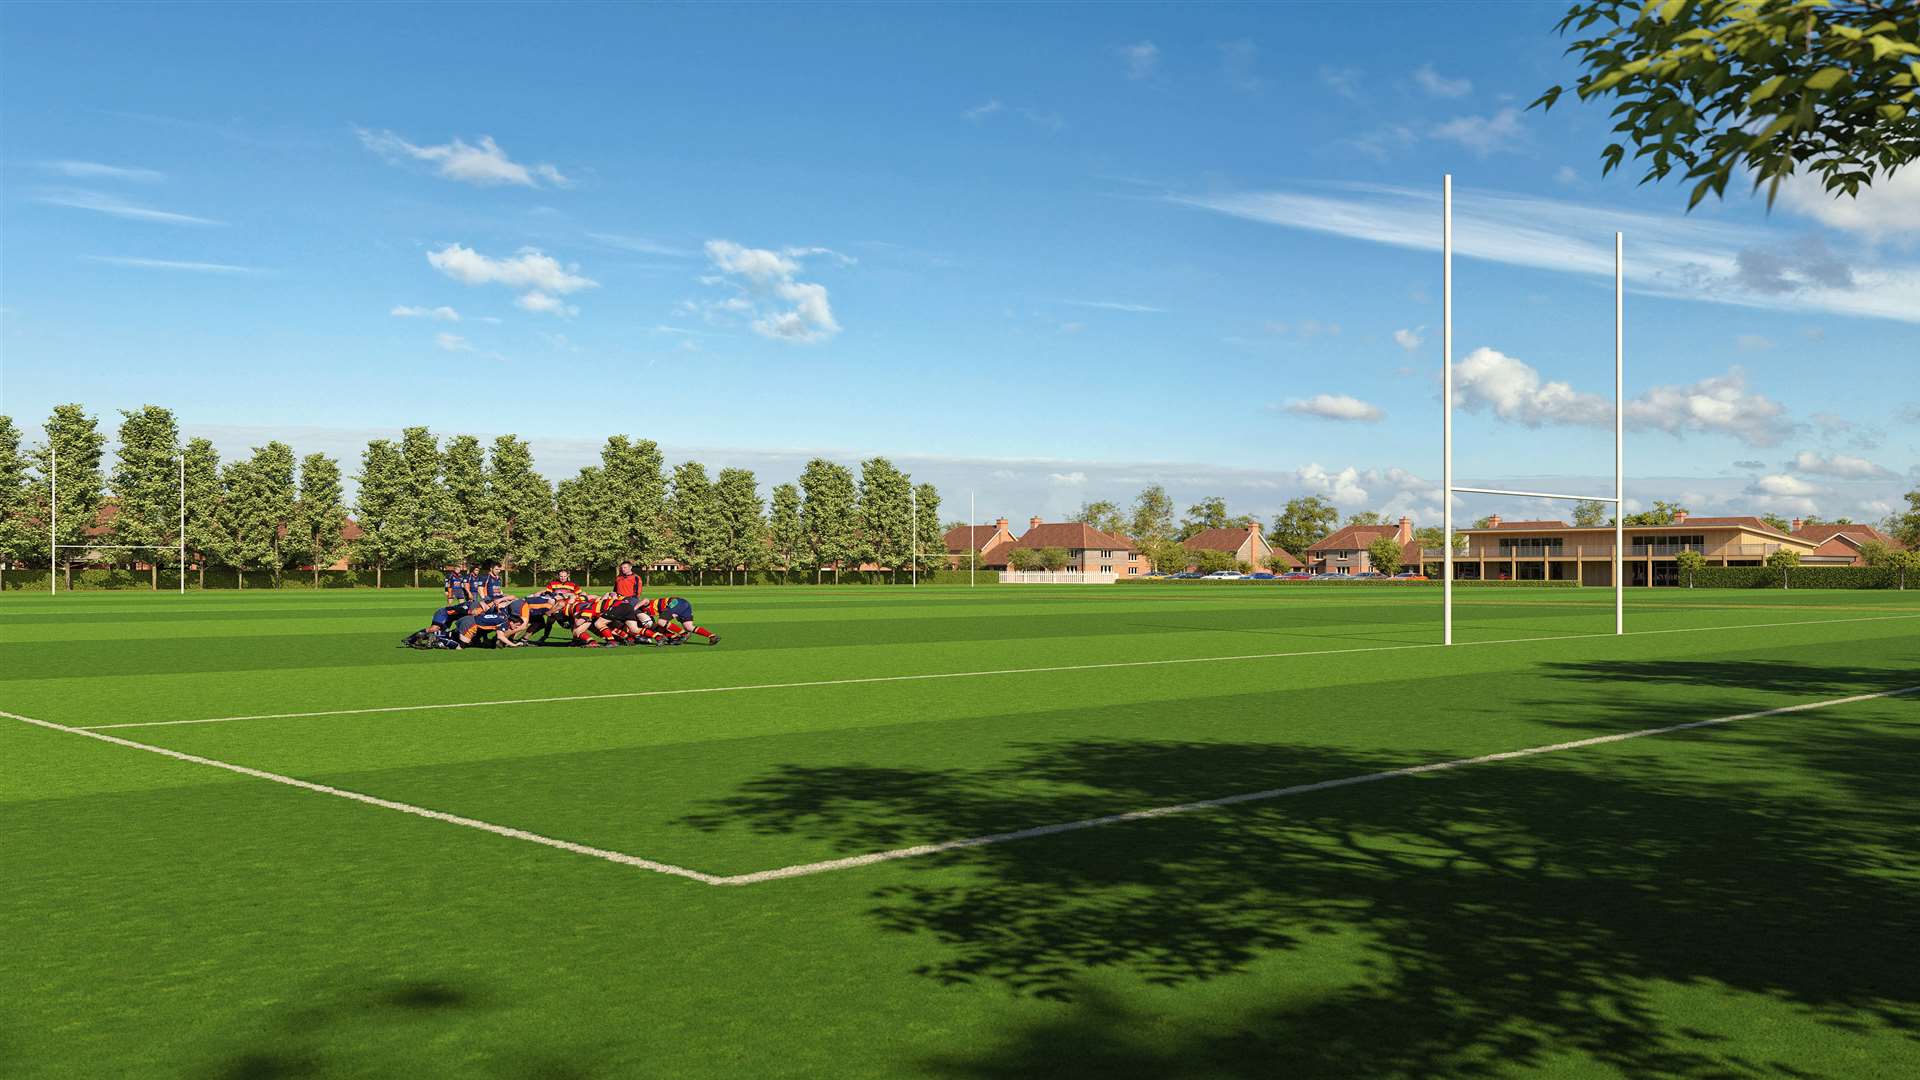 Canterbury Rugby Club also wants to develop new facilities at Highland Court.